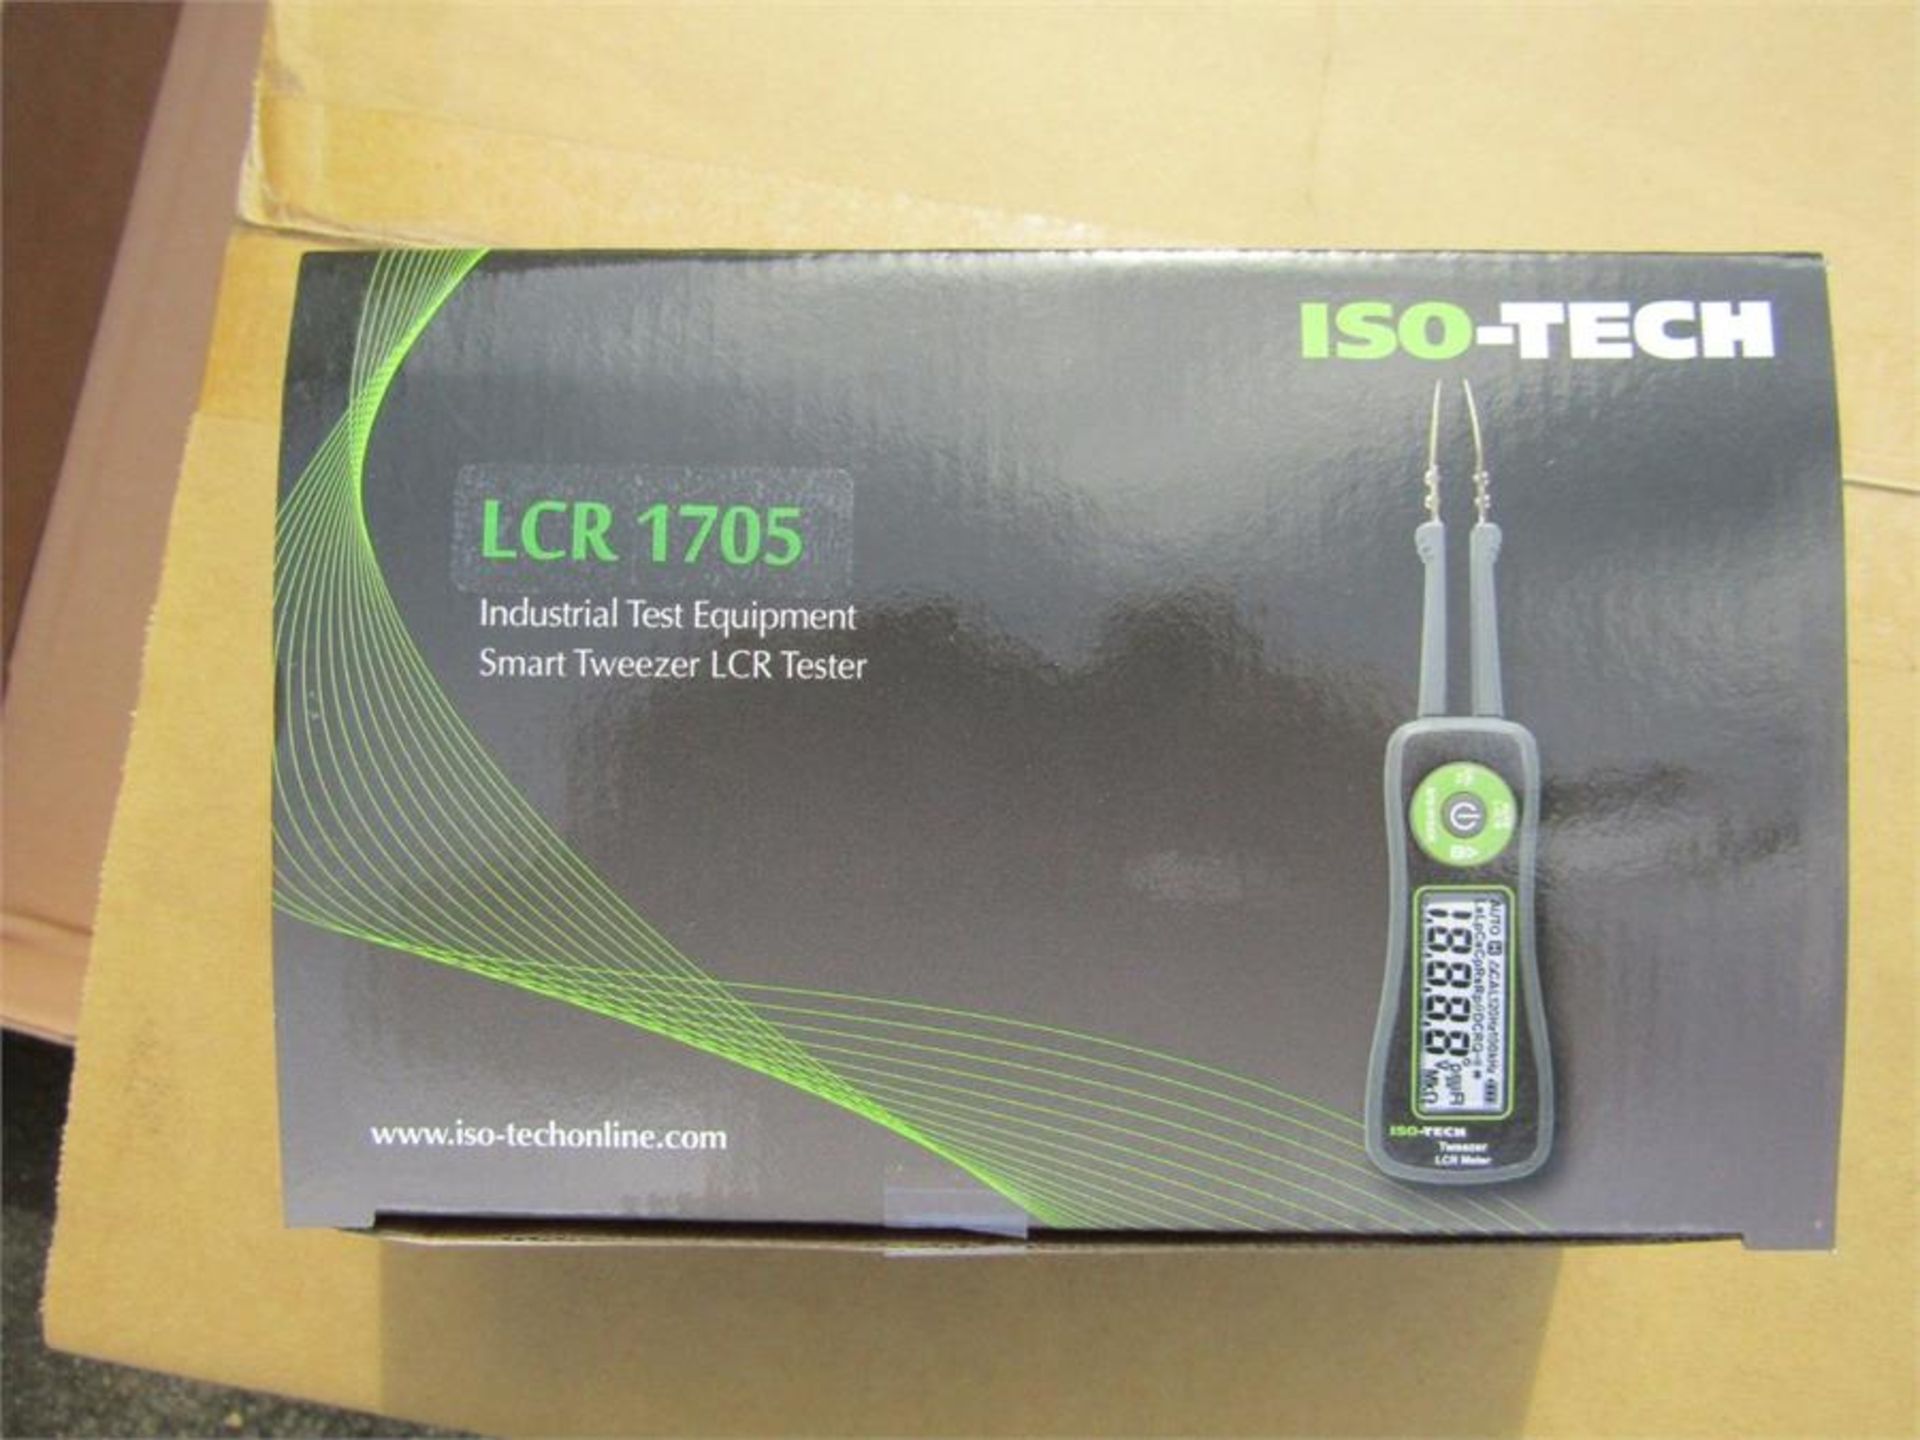 NEW ISO-TECH Smart Tweezer LCR Tester LCR 1705 - T&M 8659824 - Image 2 of 2